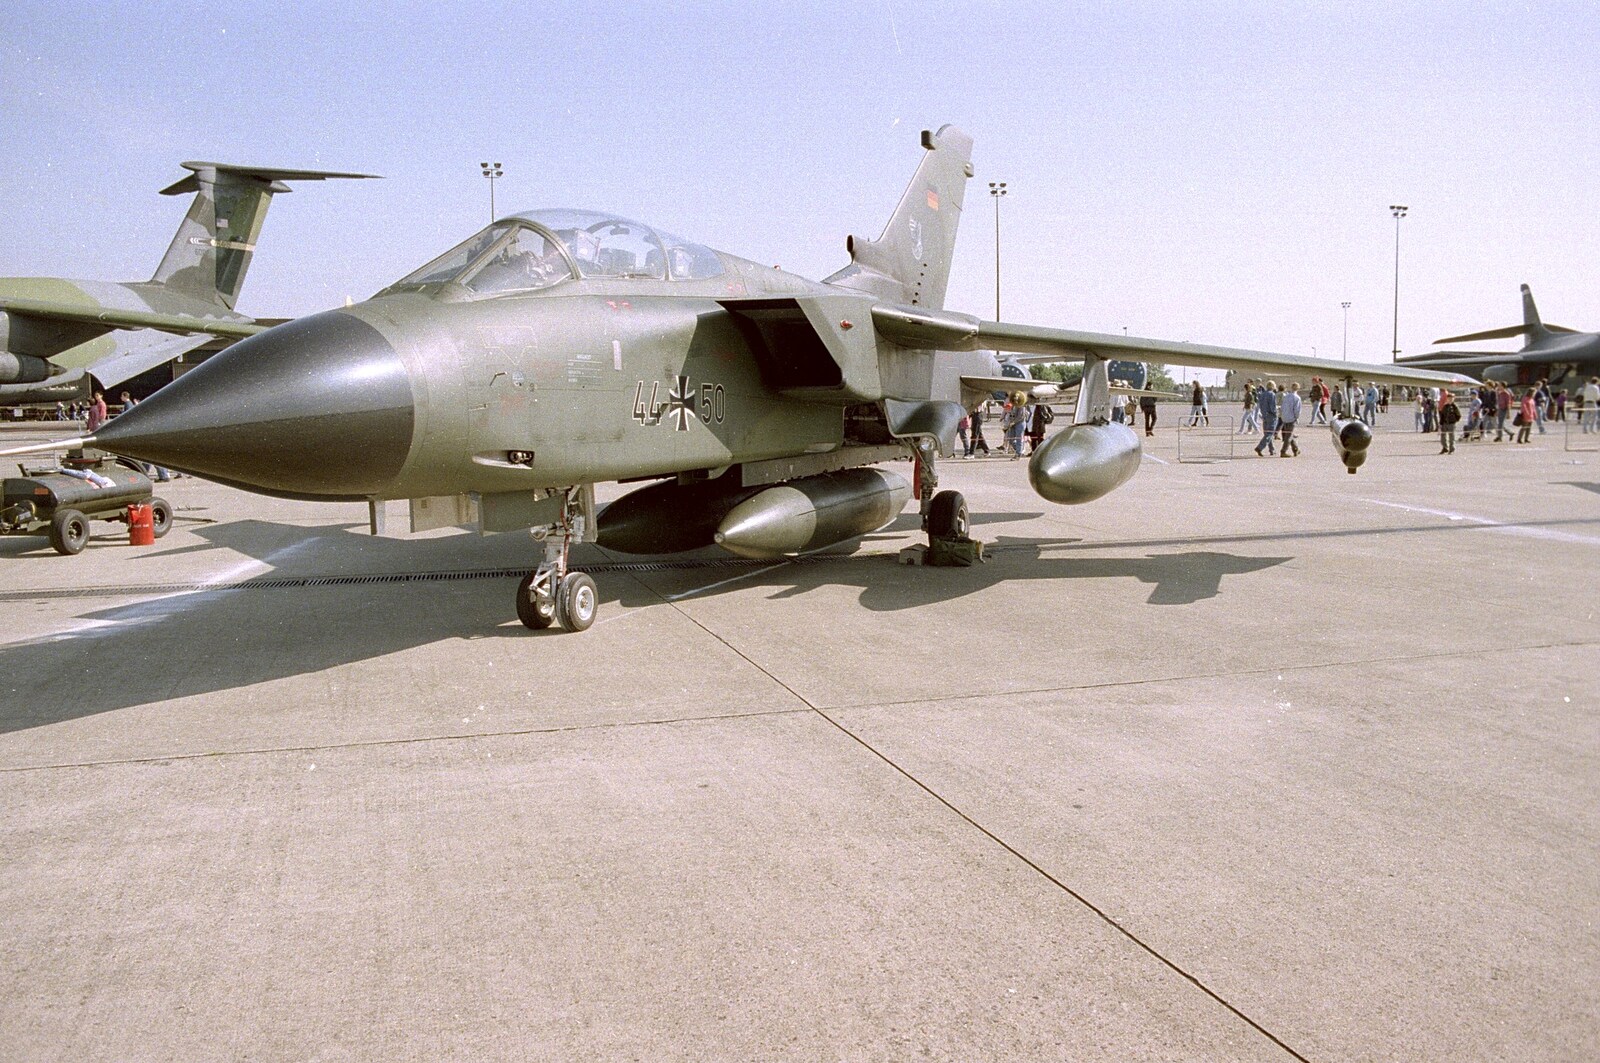 A Panavia Tornado from The Mildenhall Air Fete, Mildenhall, Suffolk - 29th May 1994